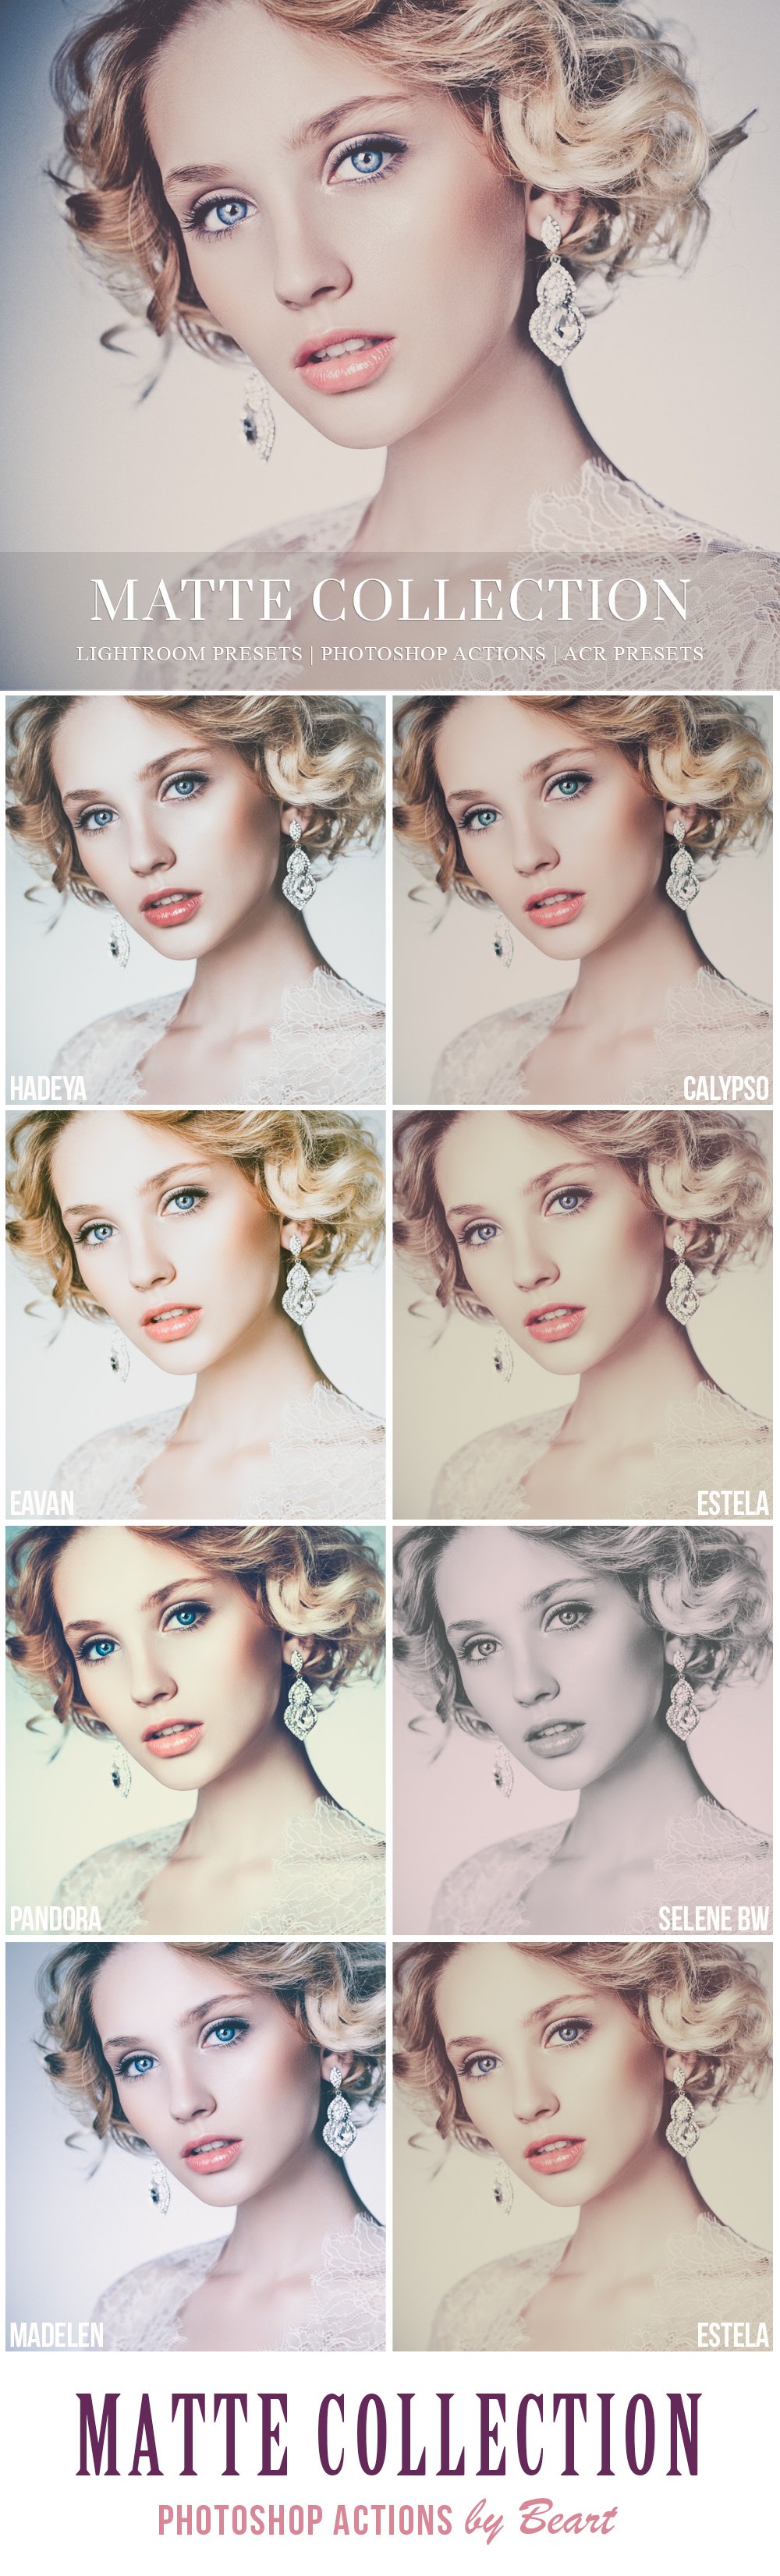 matte photoshop actions by beart presets 100